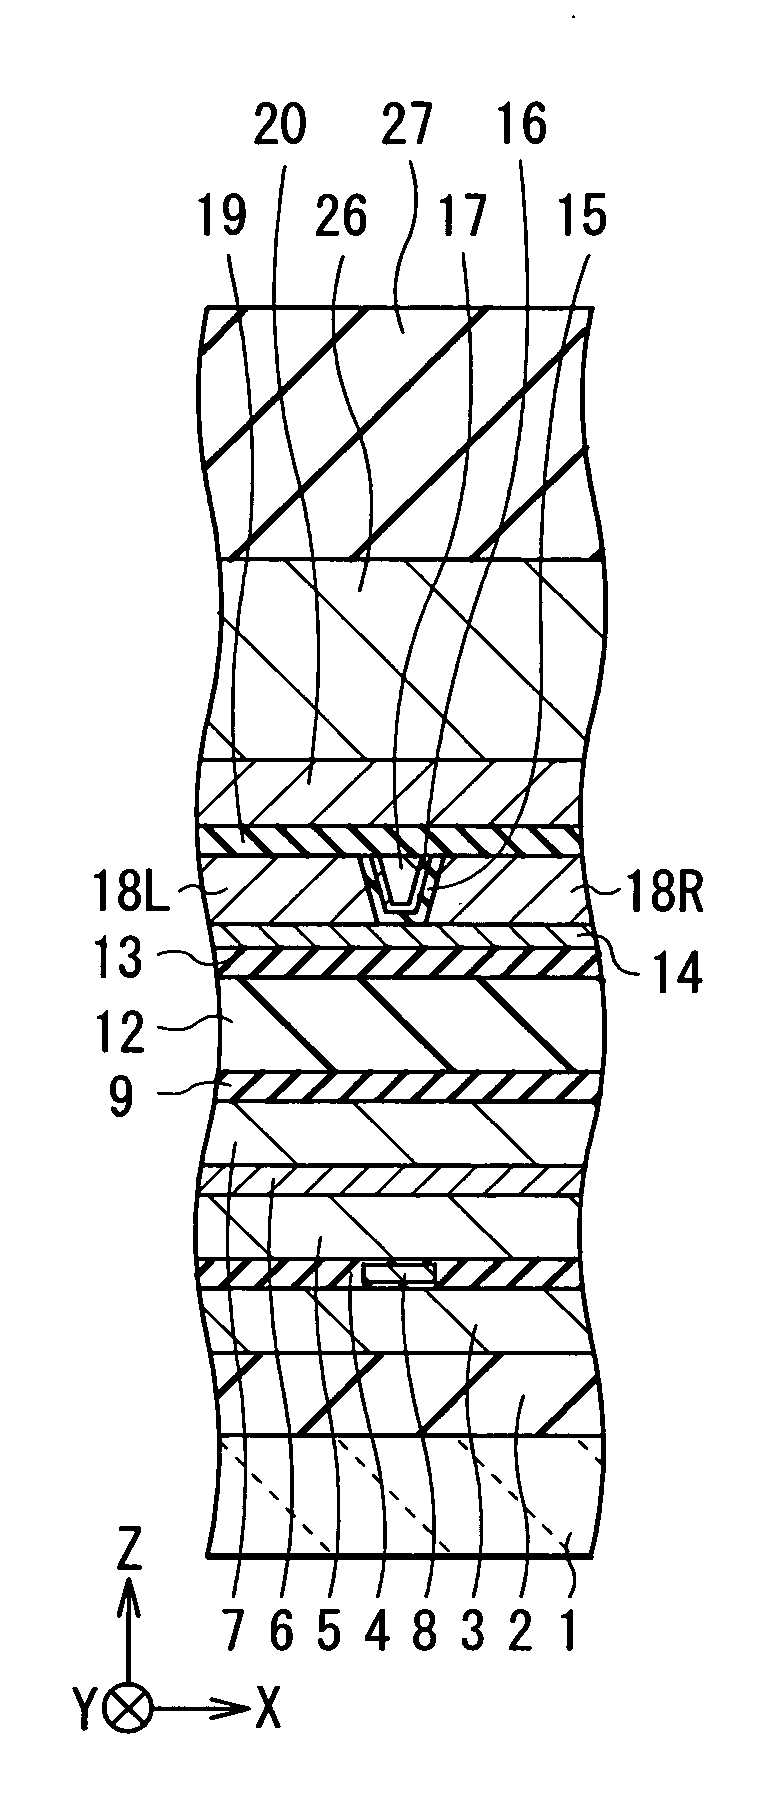 Perpendicular magnetic write head, method of manufacturing the same, and magnetic recording apparatus